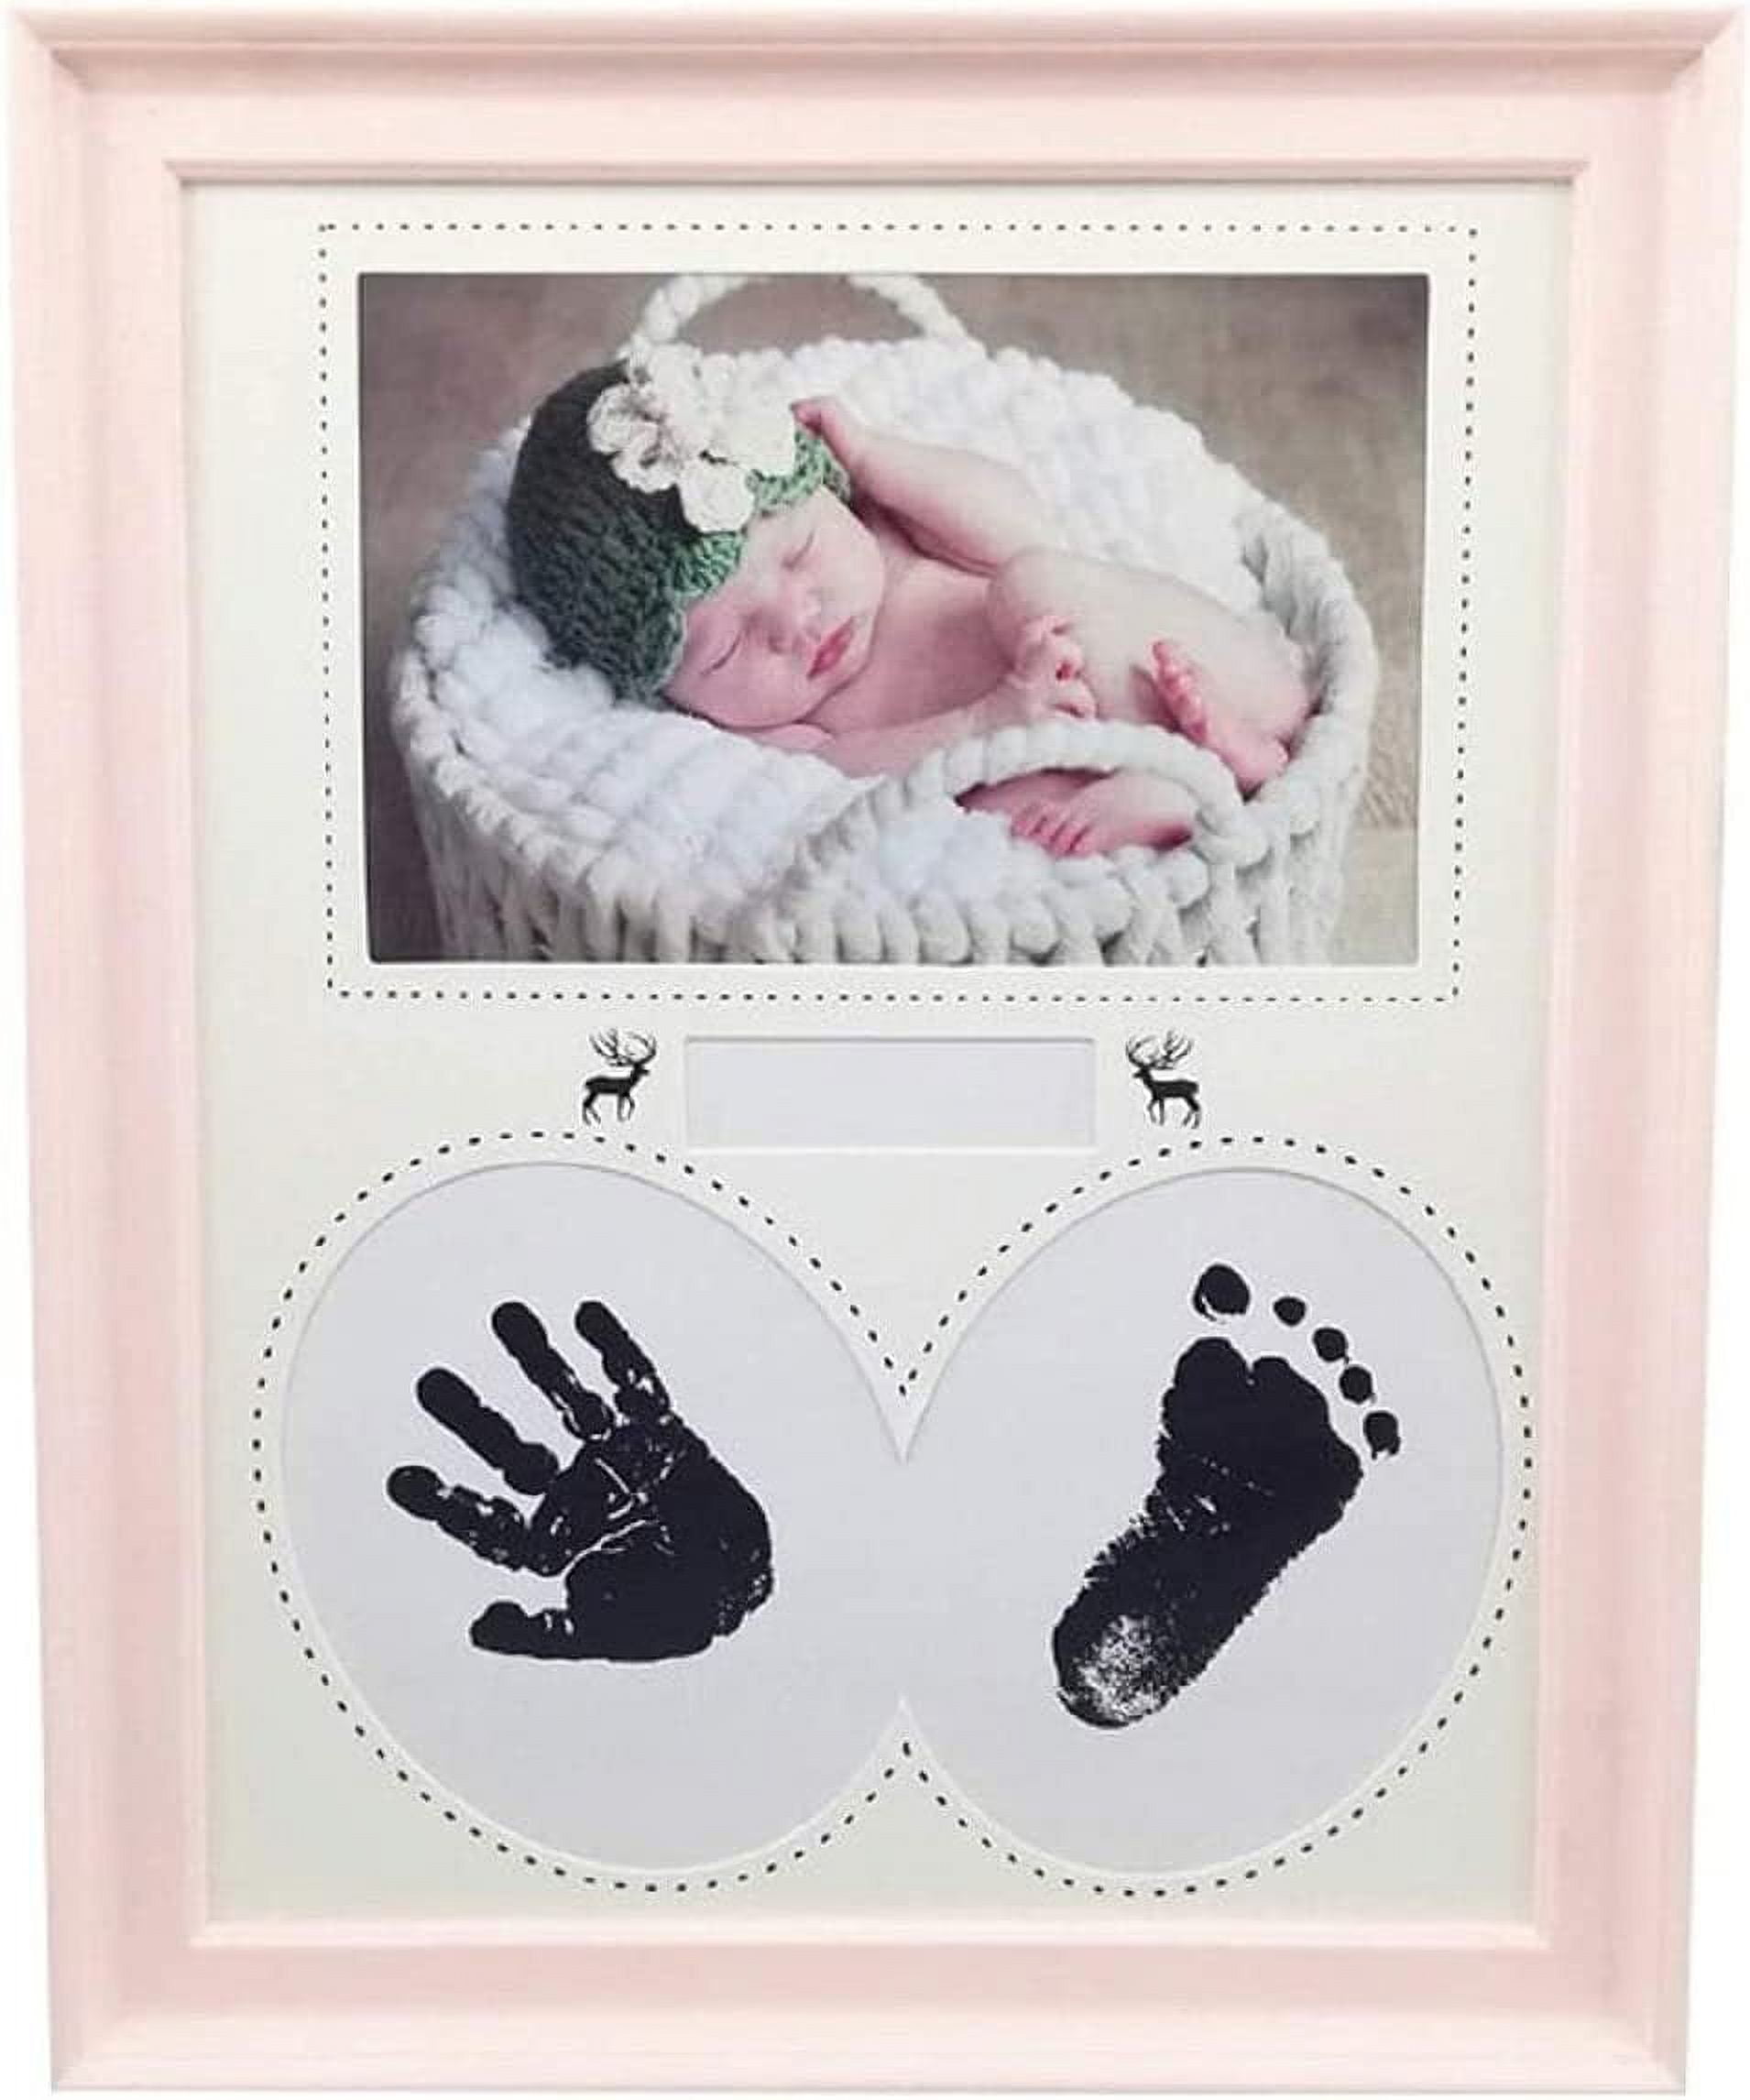 Baby Hand and Footprint Kit, New Born Baby Girls Gift, Registry for Baby,  Gender Reveal Gifts, Baby Footprint Kit, Gifts for New Mom, Newborn Gifts